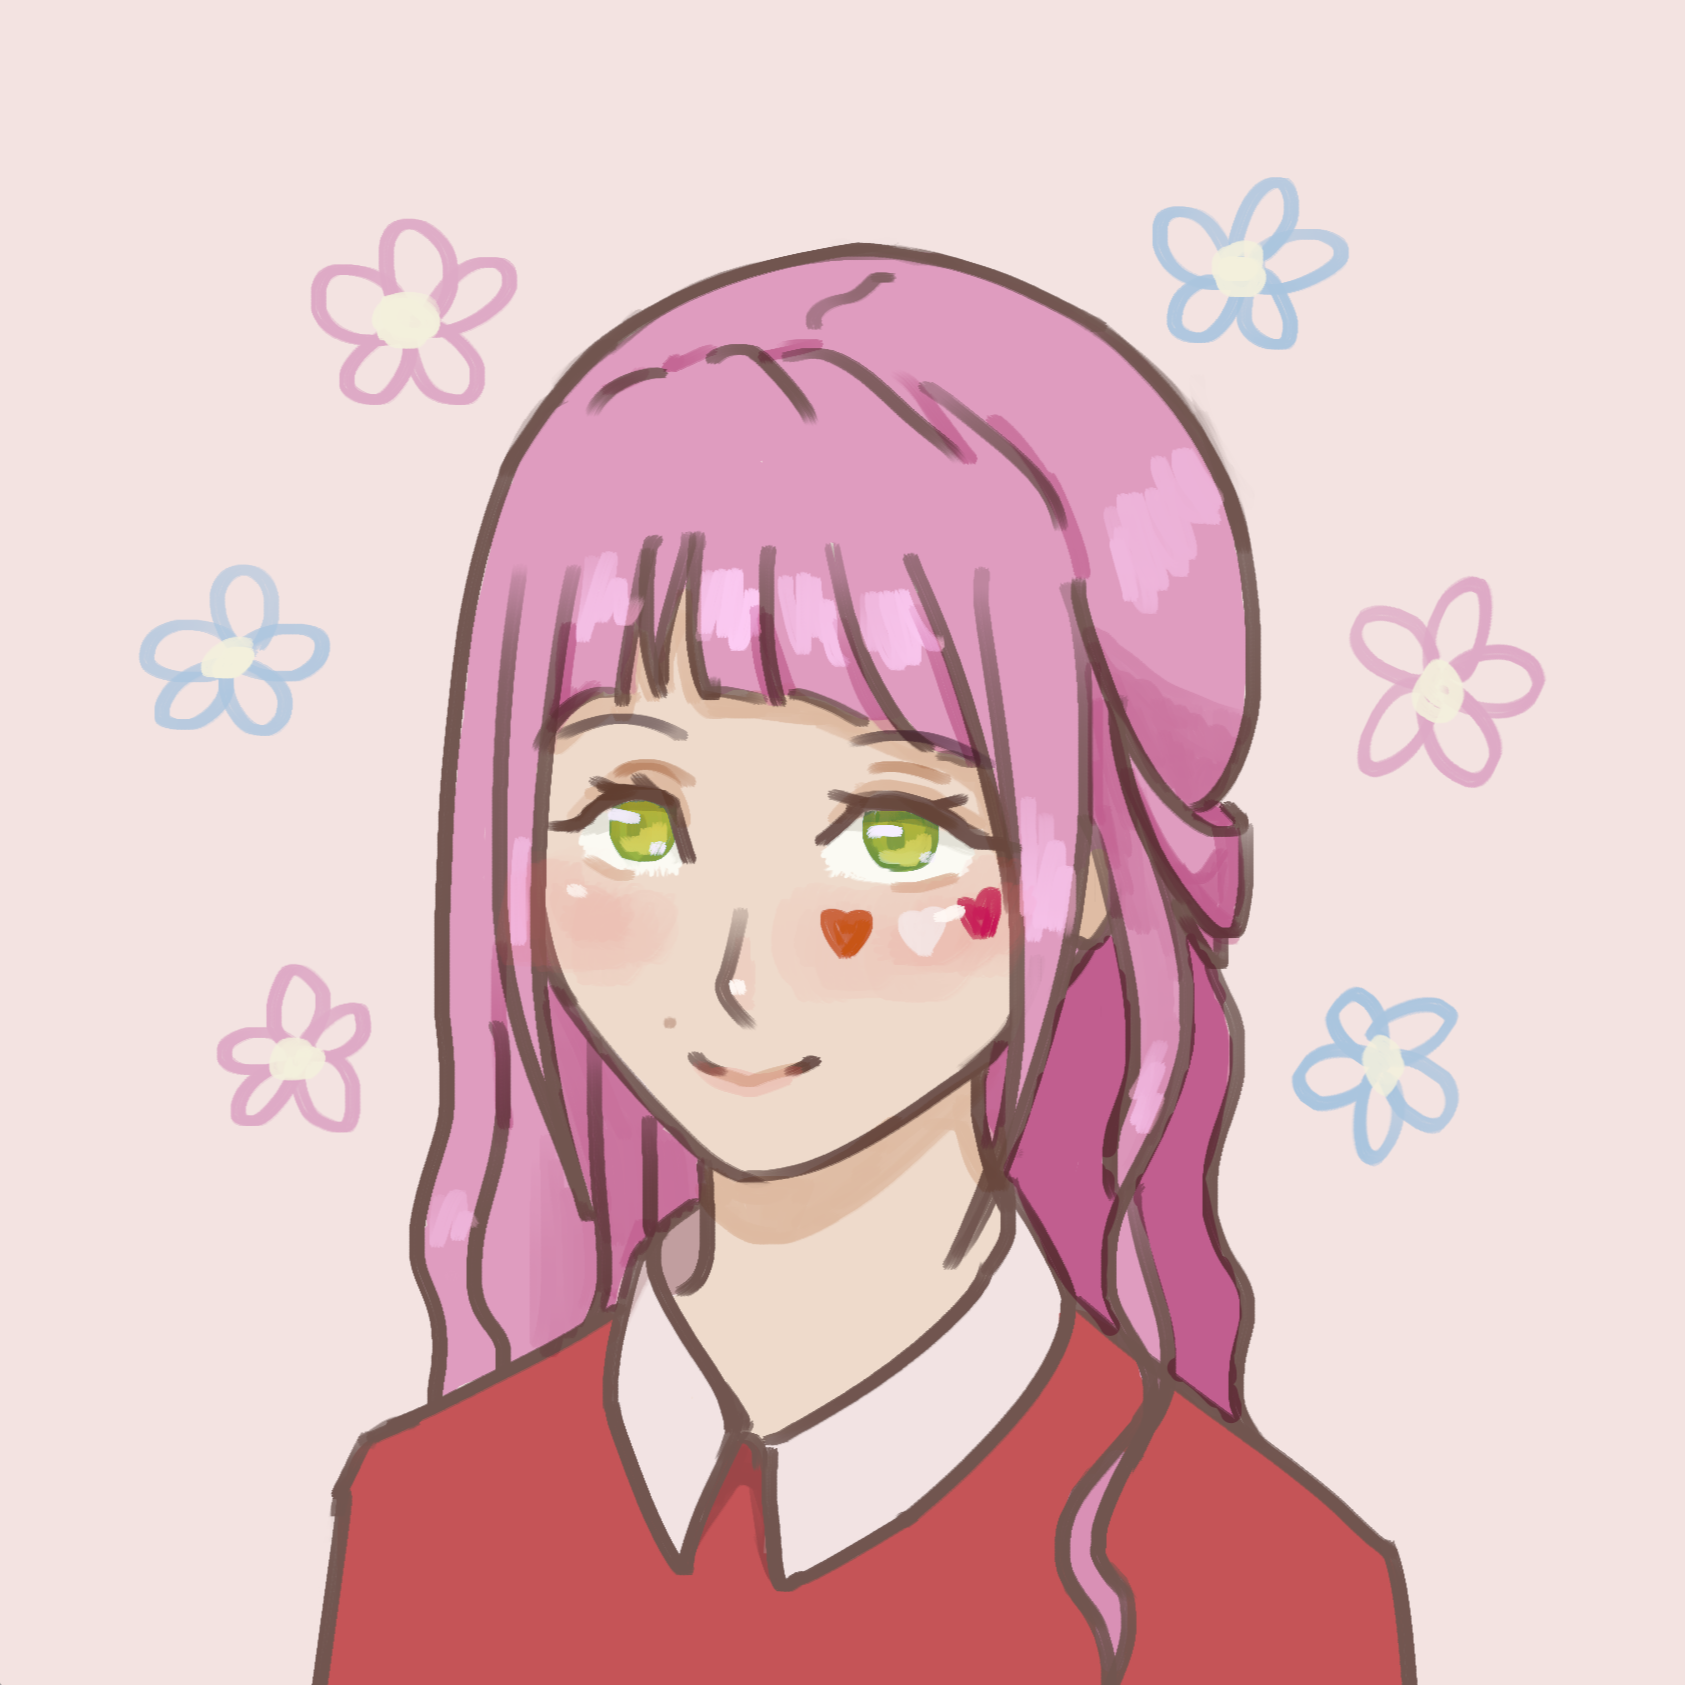 Drawing: anime-styled girl with pink hair and yellowish-green eyes, with flowers in transgender flag colors around and hearts painted on right cheek with lesbian flag colors